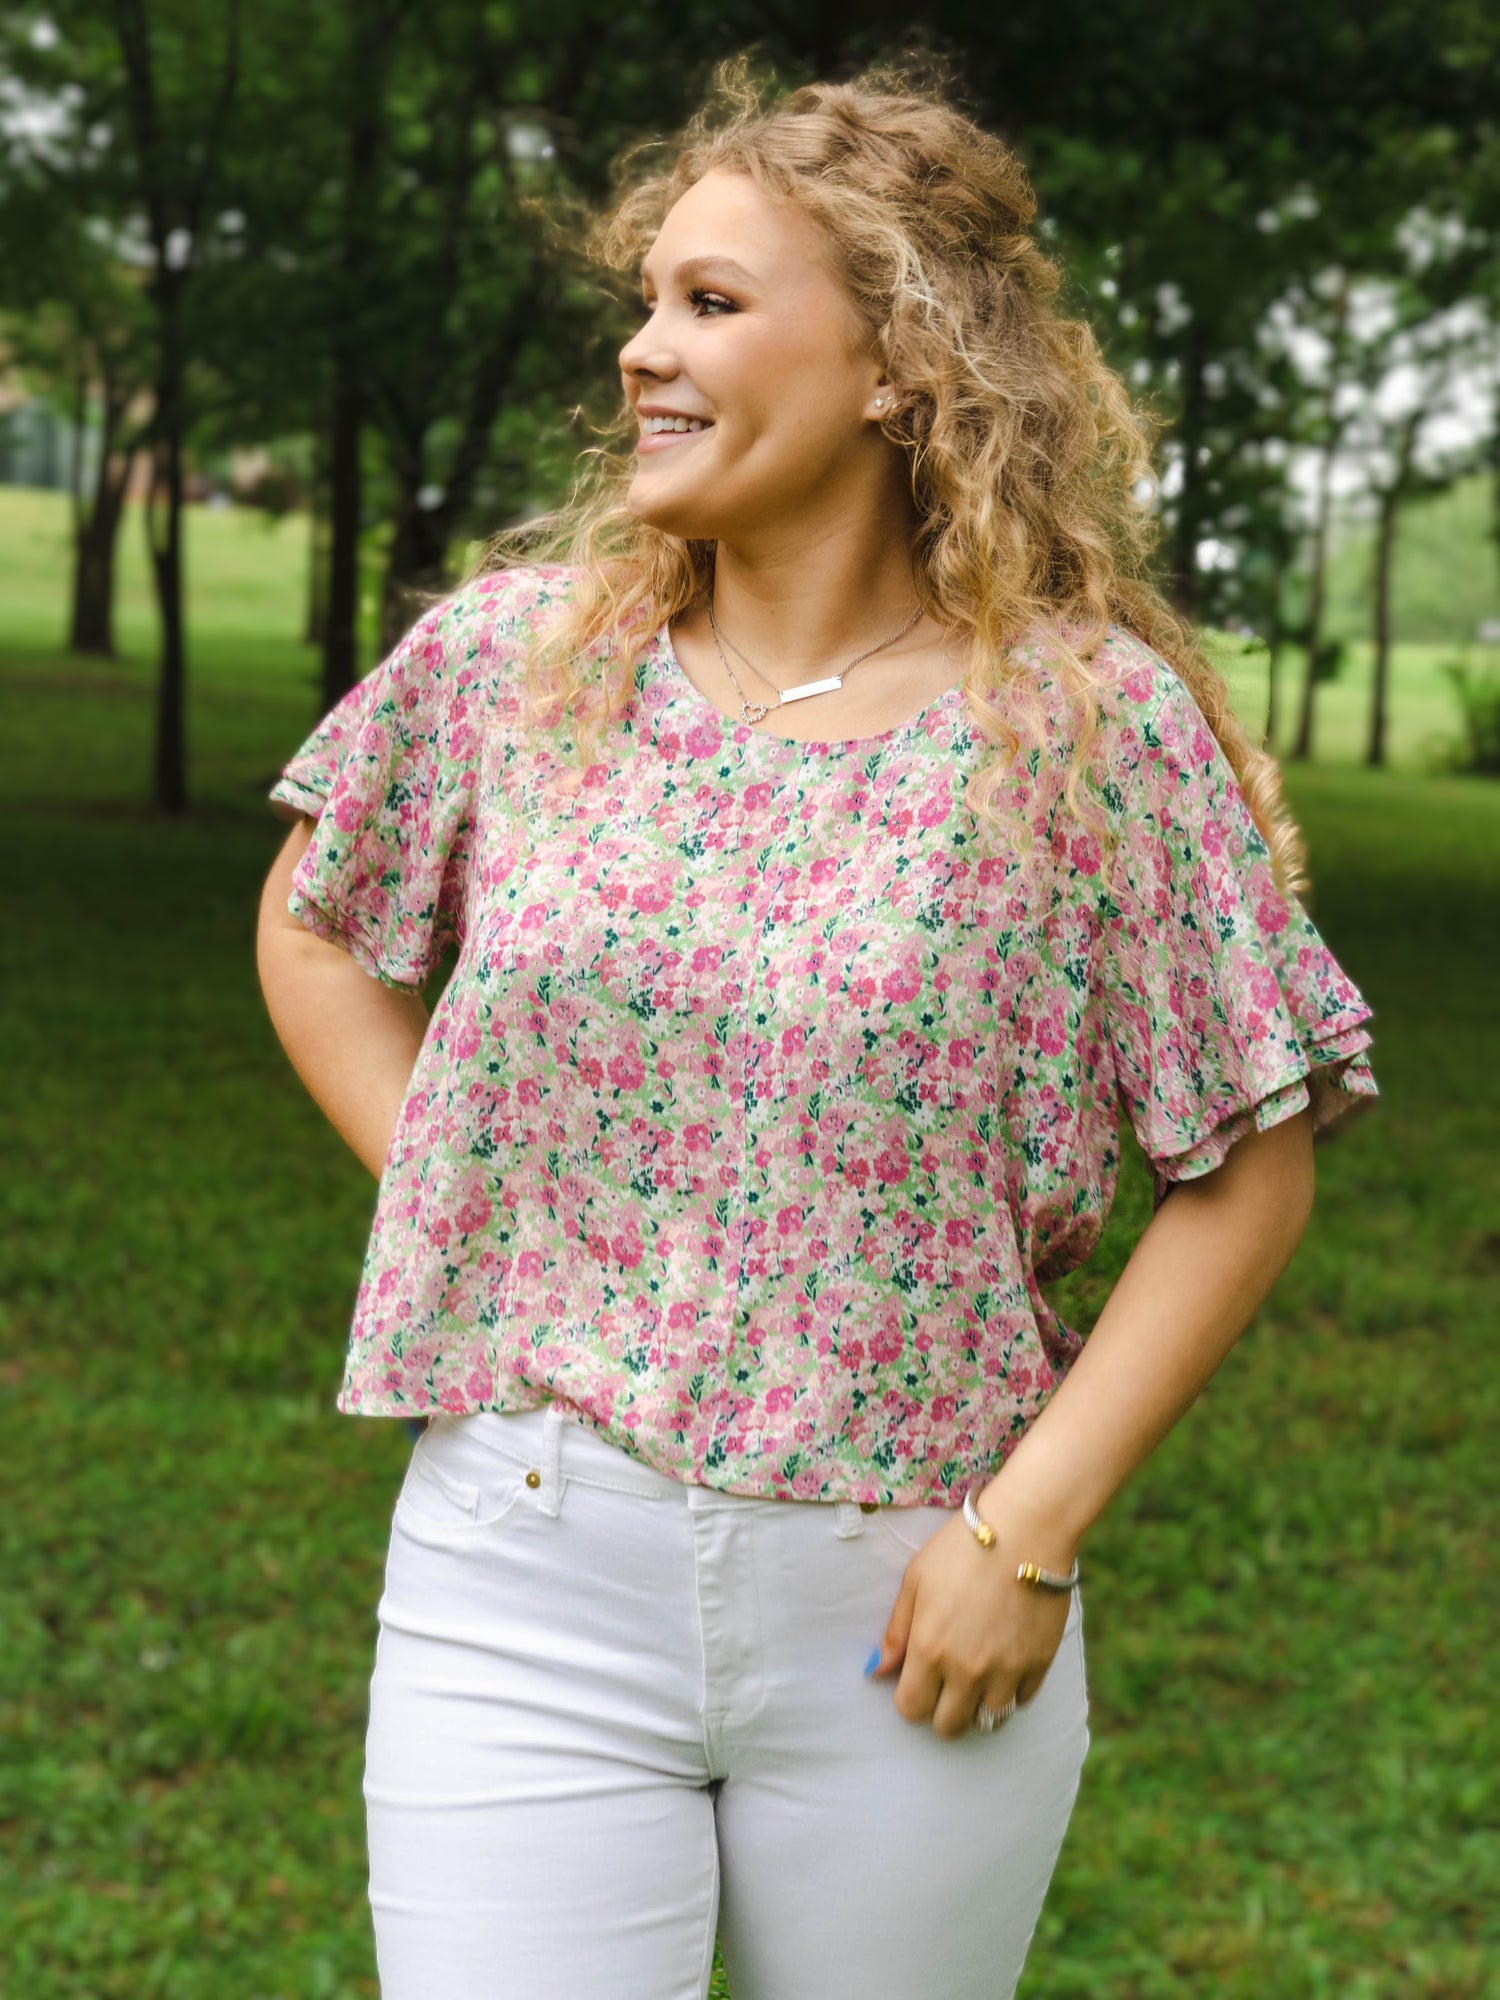 This image of a woman features the product Classic Flutter Top - Joyful. This top has a keyhole back and flowy double ruffle sleeves. It is a pink and green floral pattern.